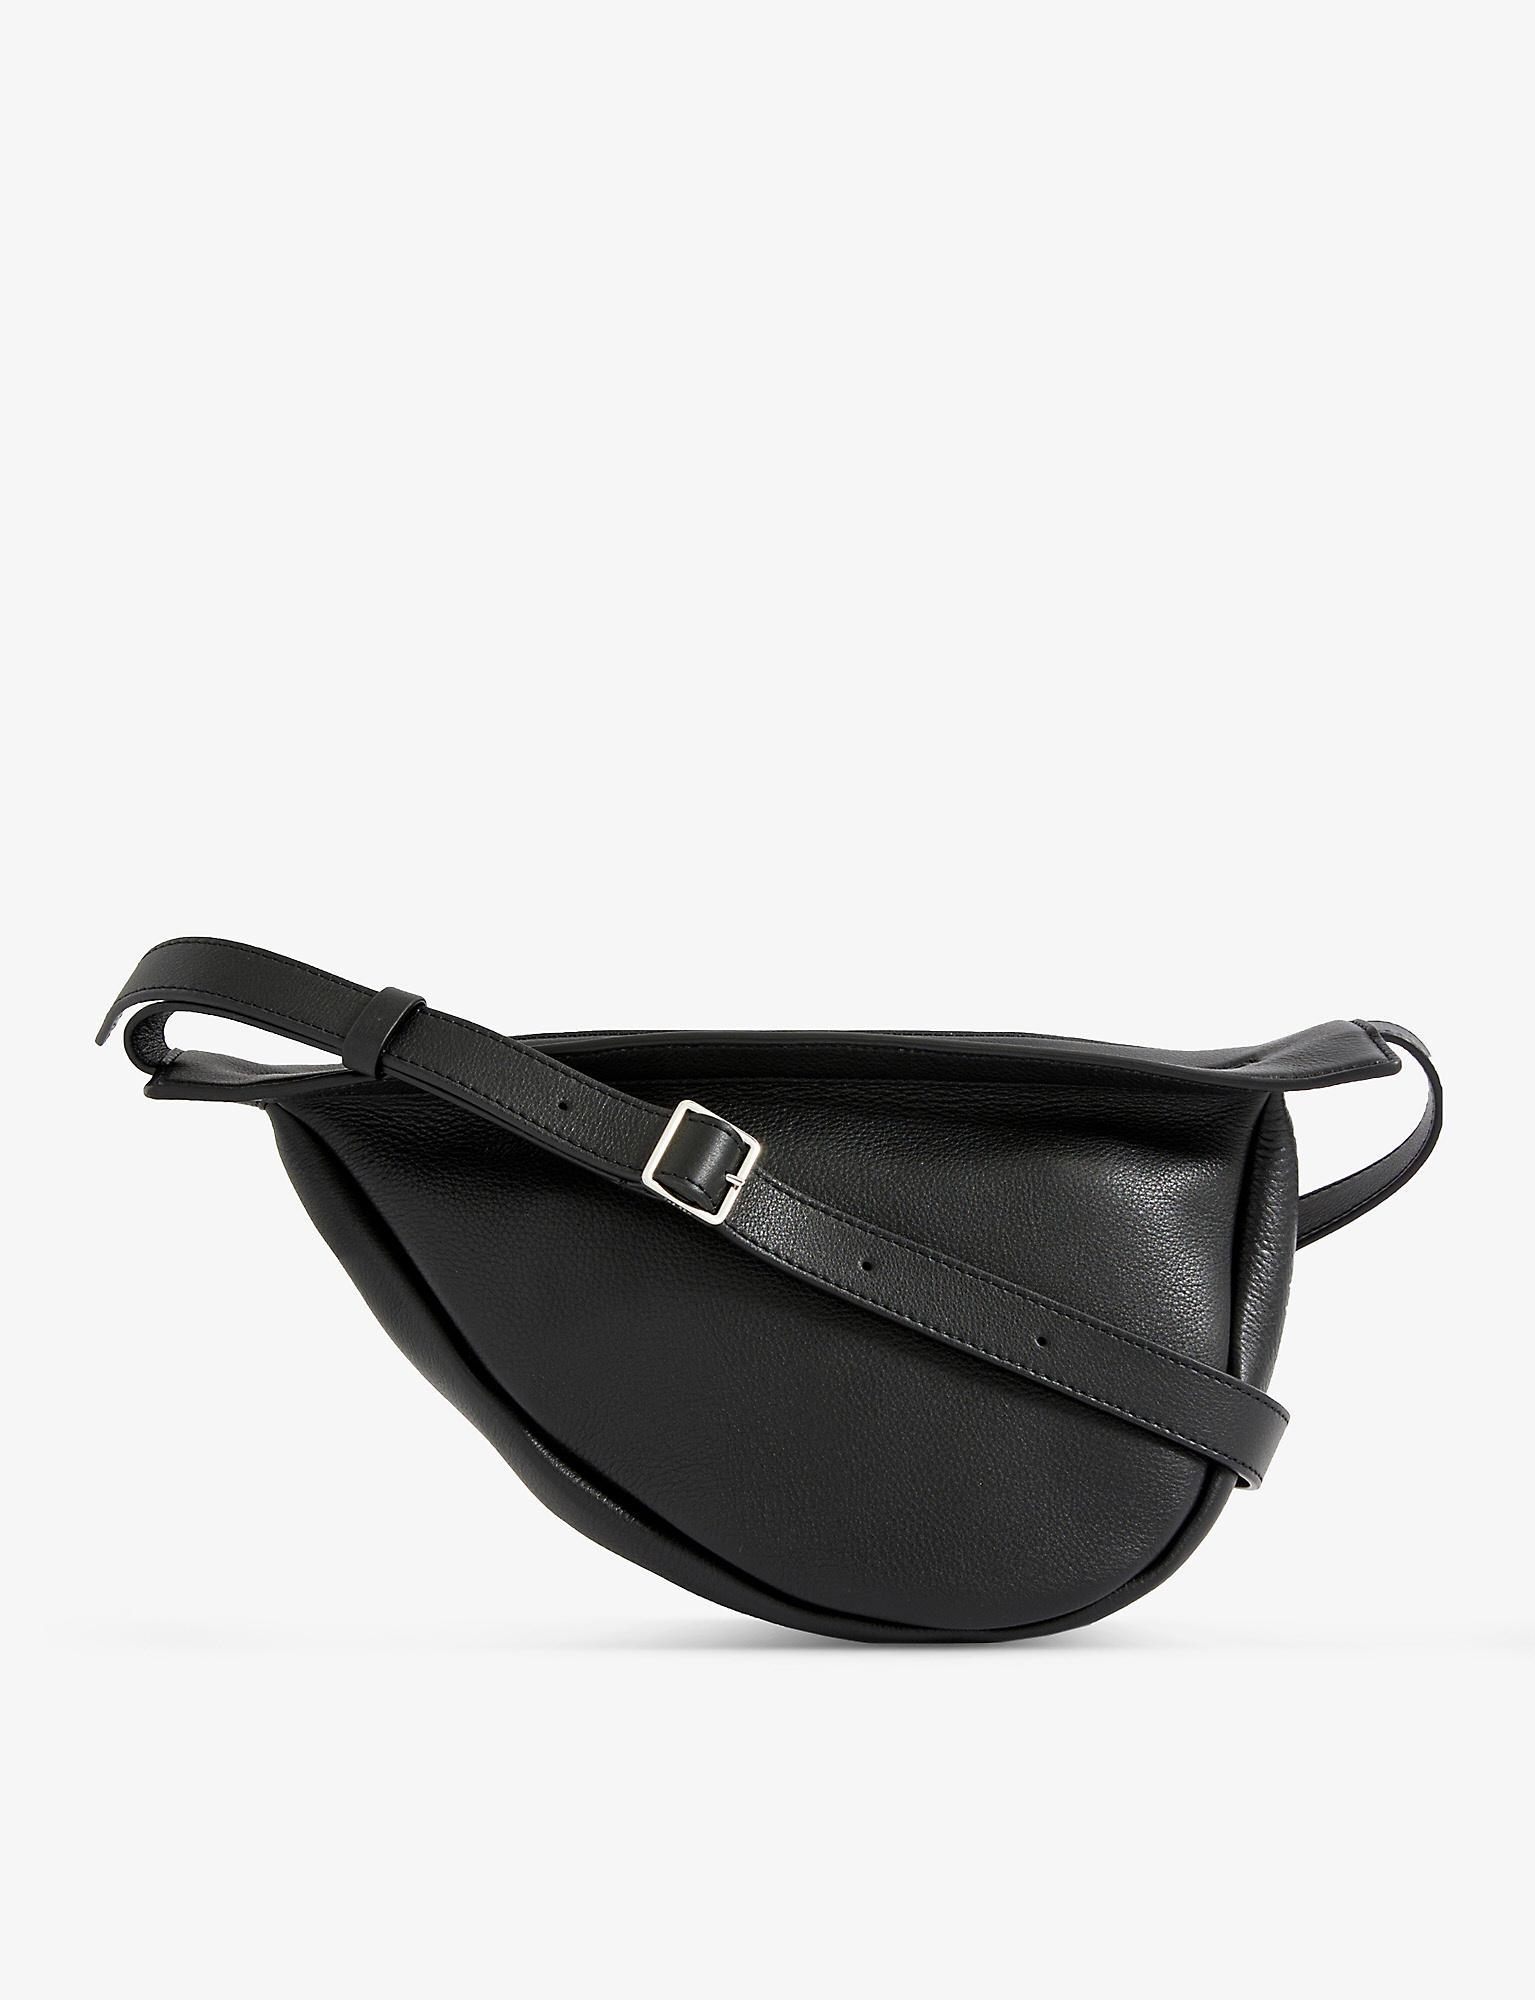 The Row 'slouchy Banana' Small Leather Bag in White